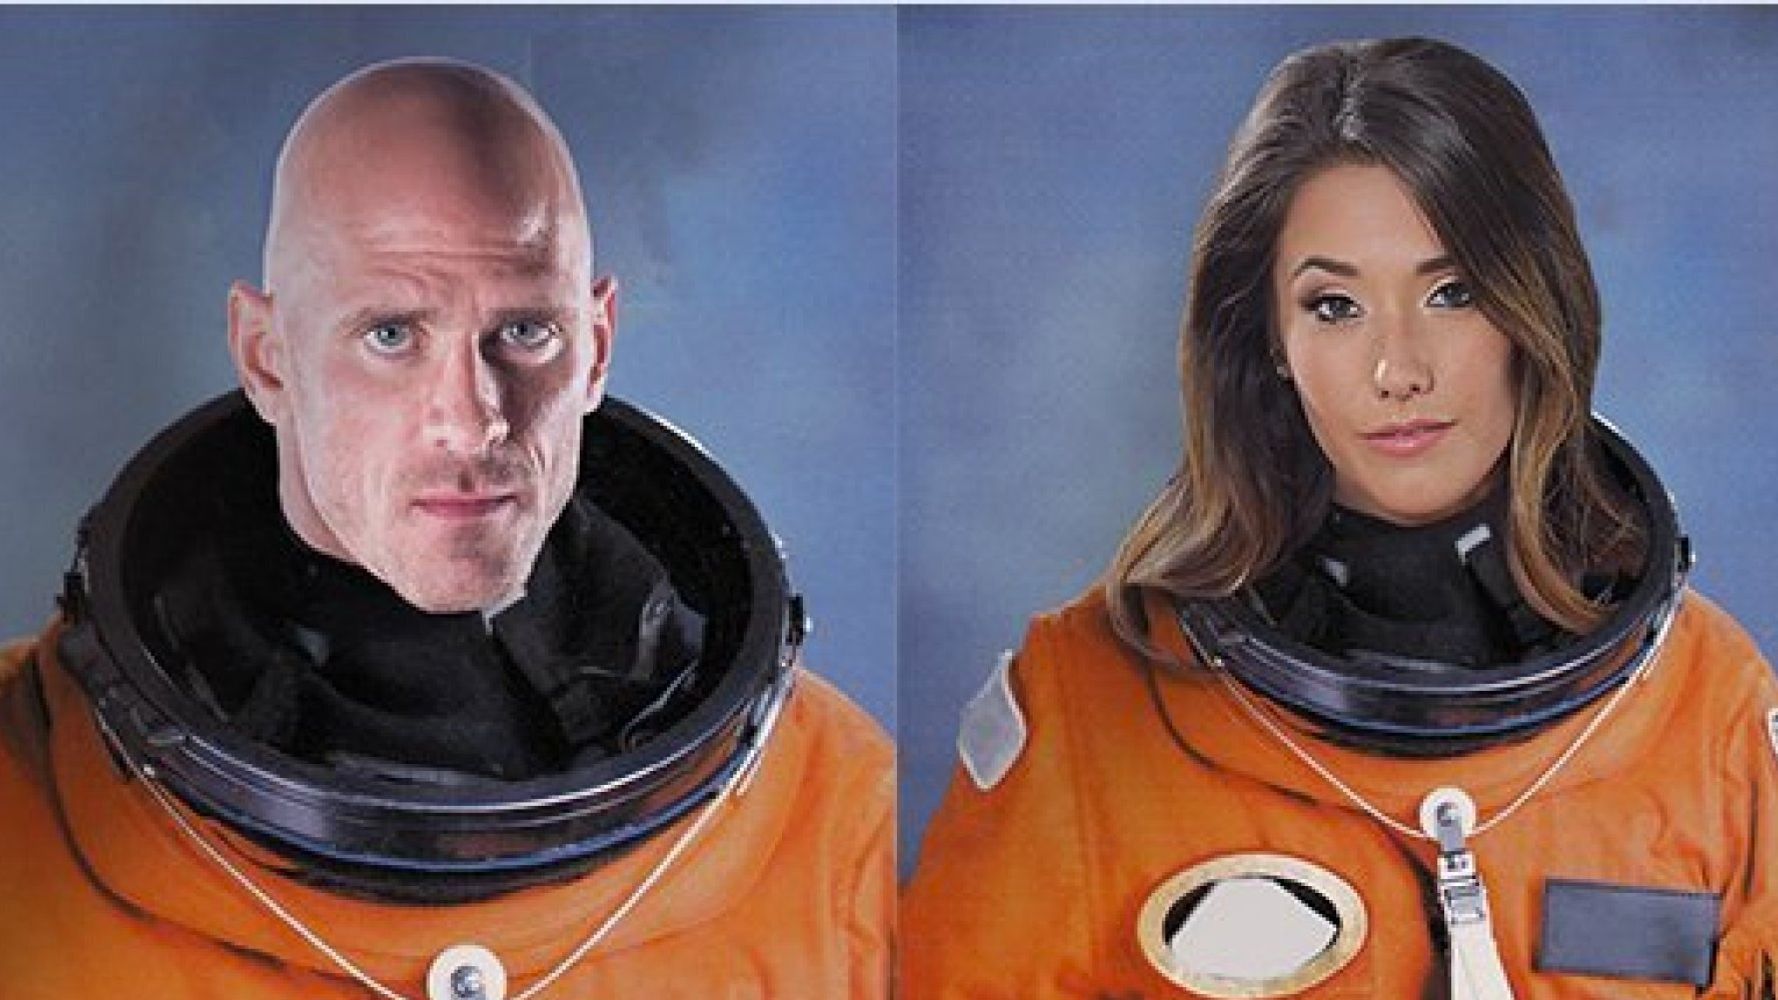 Jhonny Sin Space Sex - Pornhub Crowdfunding First Sex In Space Film Starring Johnny Sins And Eva  Lovia | HuffPost UK Tech